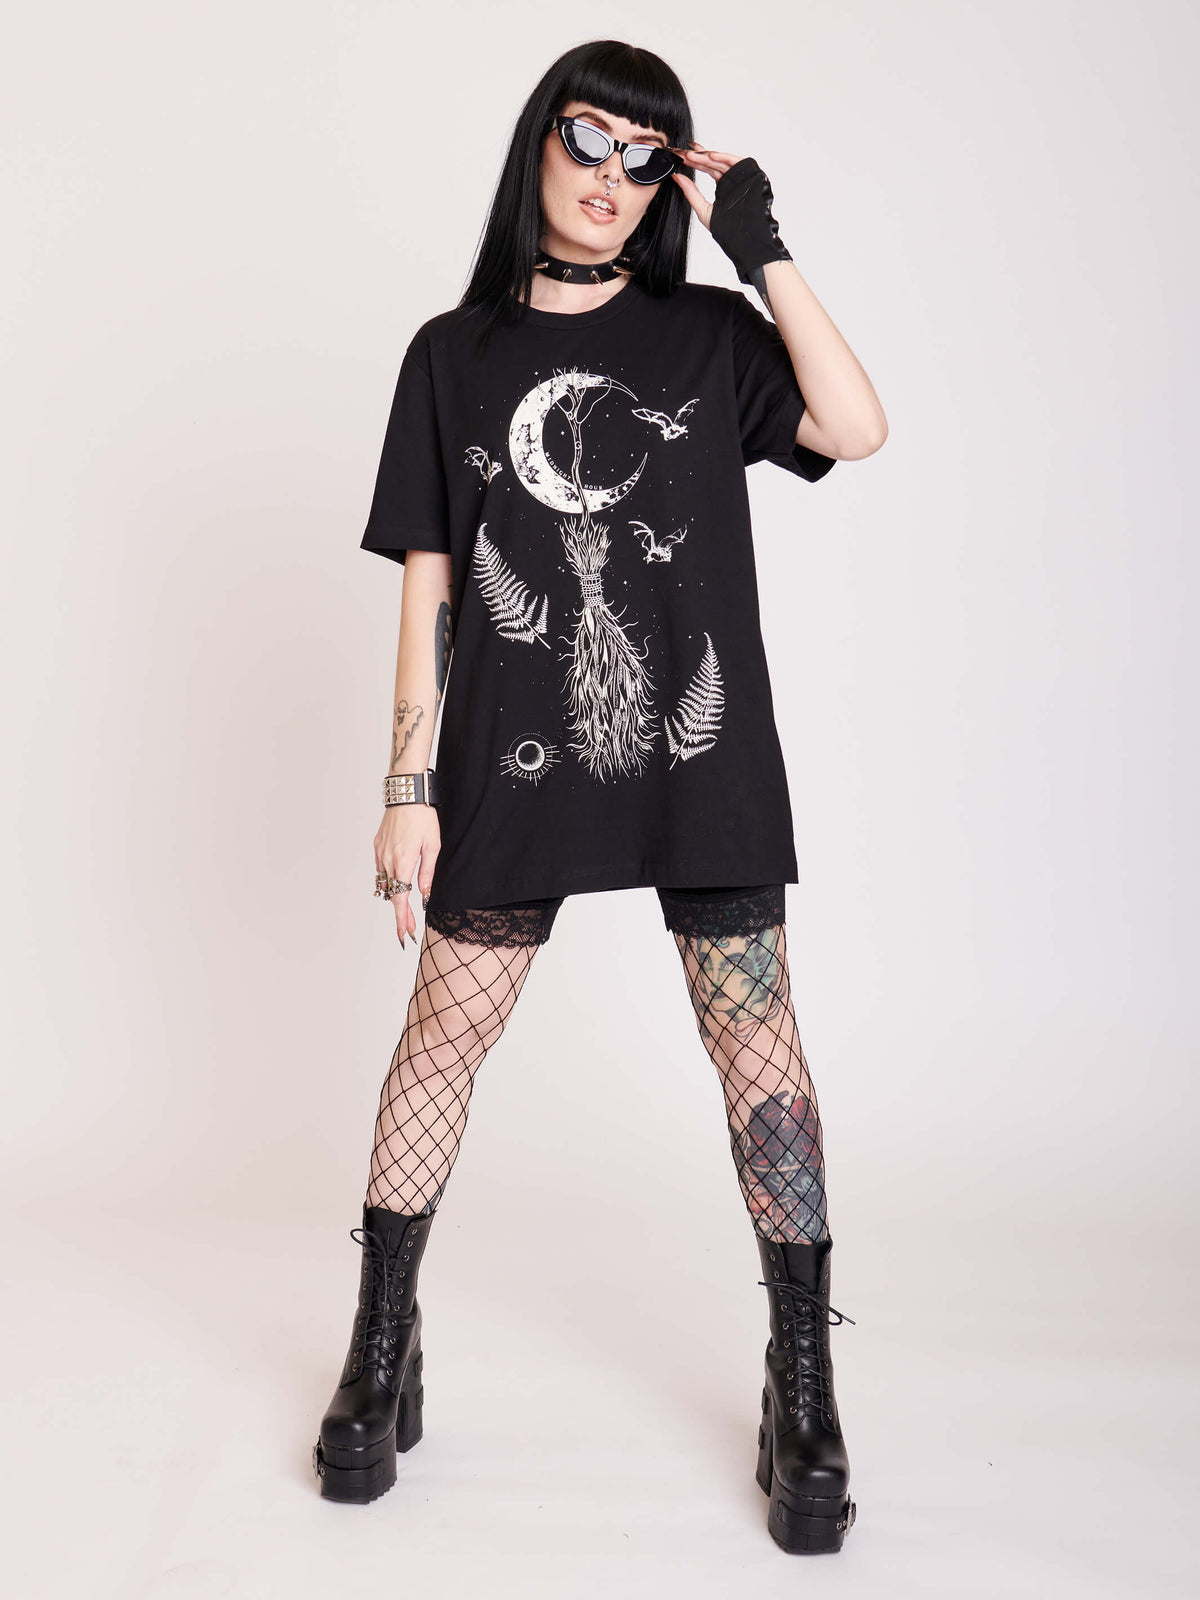 Witch Broom T-shirt